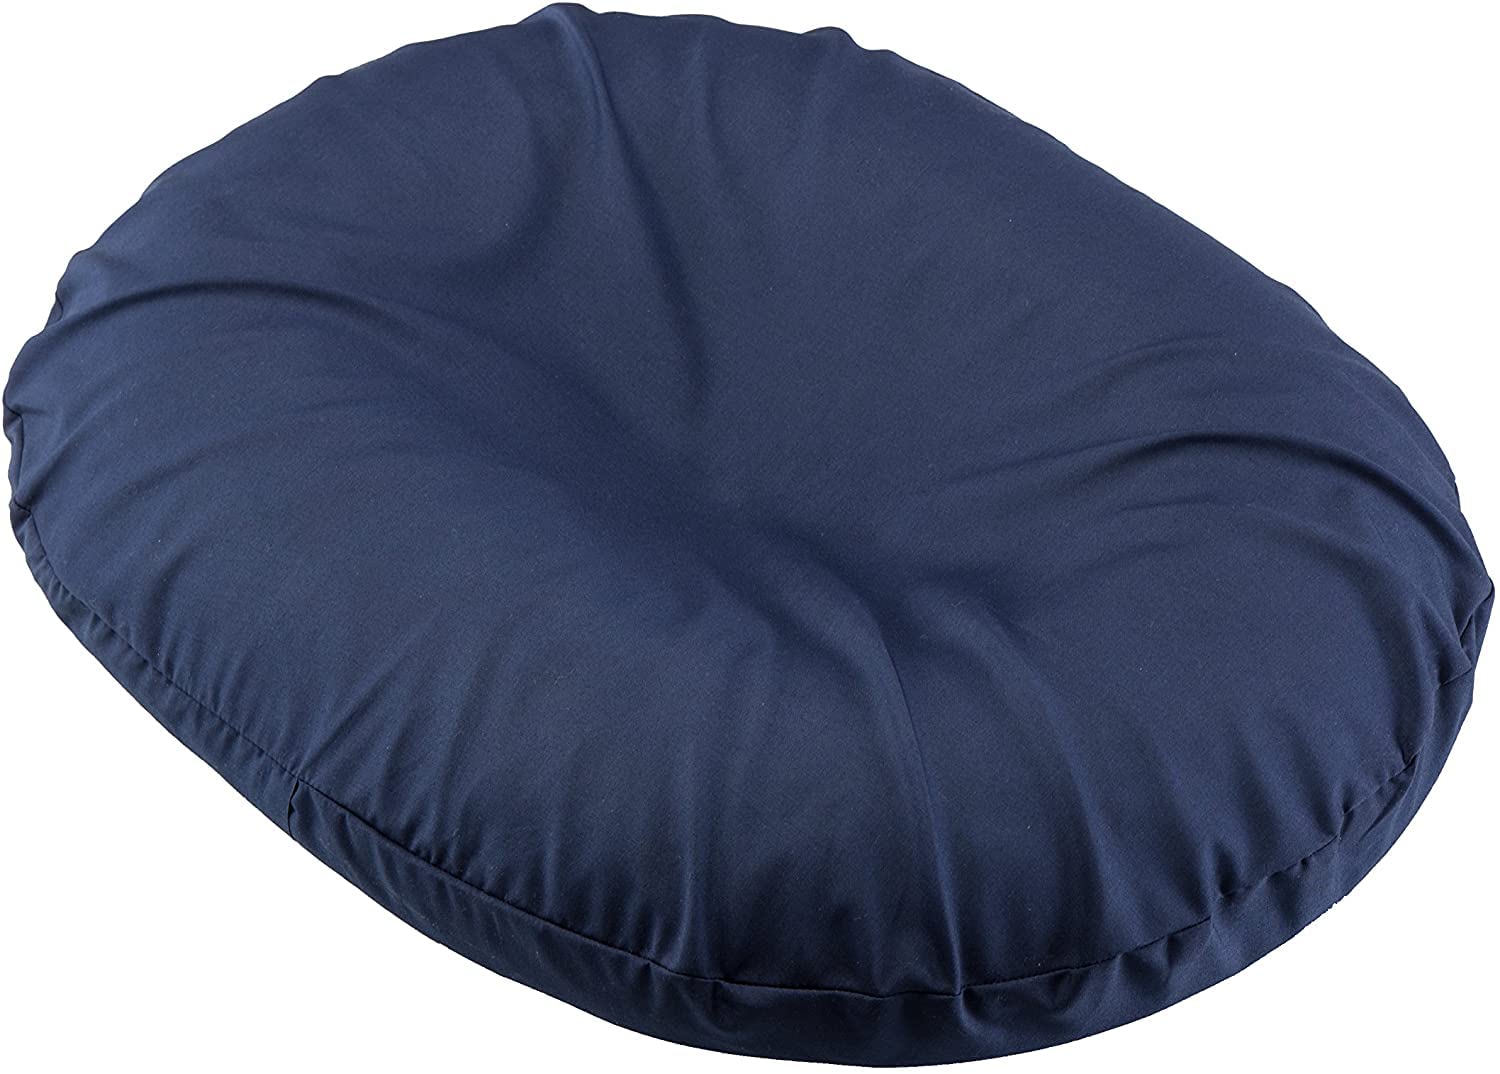 BodyHealt Donut Pillow for Hemorrhoids - Tailbone Cushion for Coccyx, Surgery, Pressure Sores, & Sciatic Pain Relief. Comfort Donut Seat Cushion for Pregnancy and Postpartum Recovery (Navy, 16 Inch)